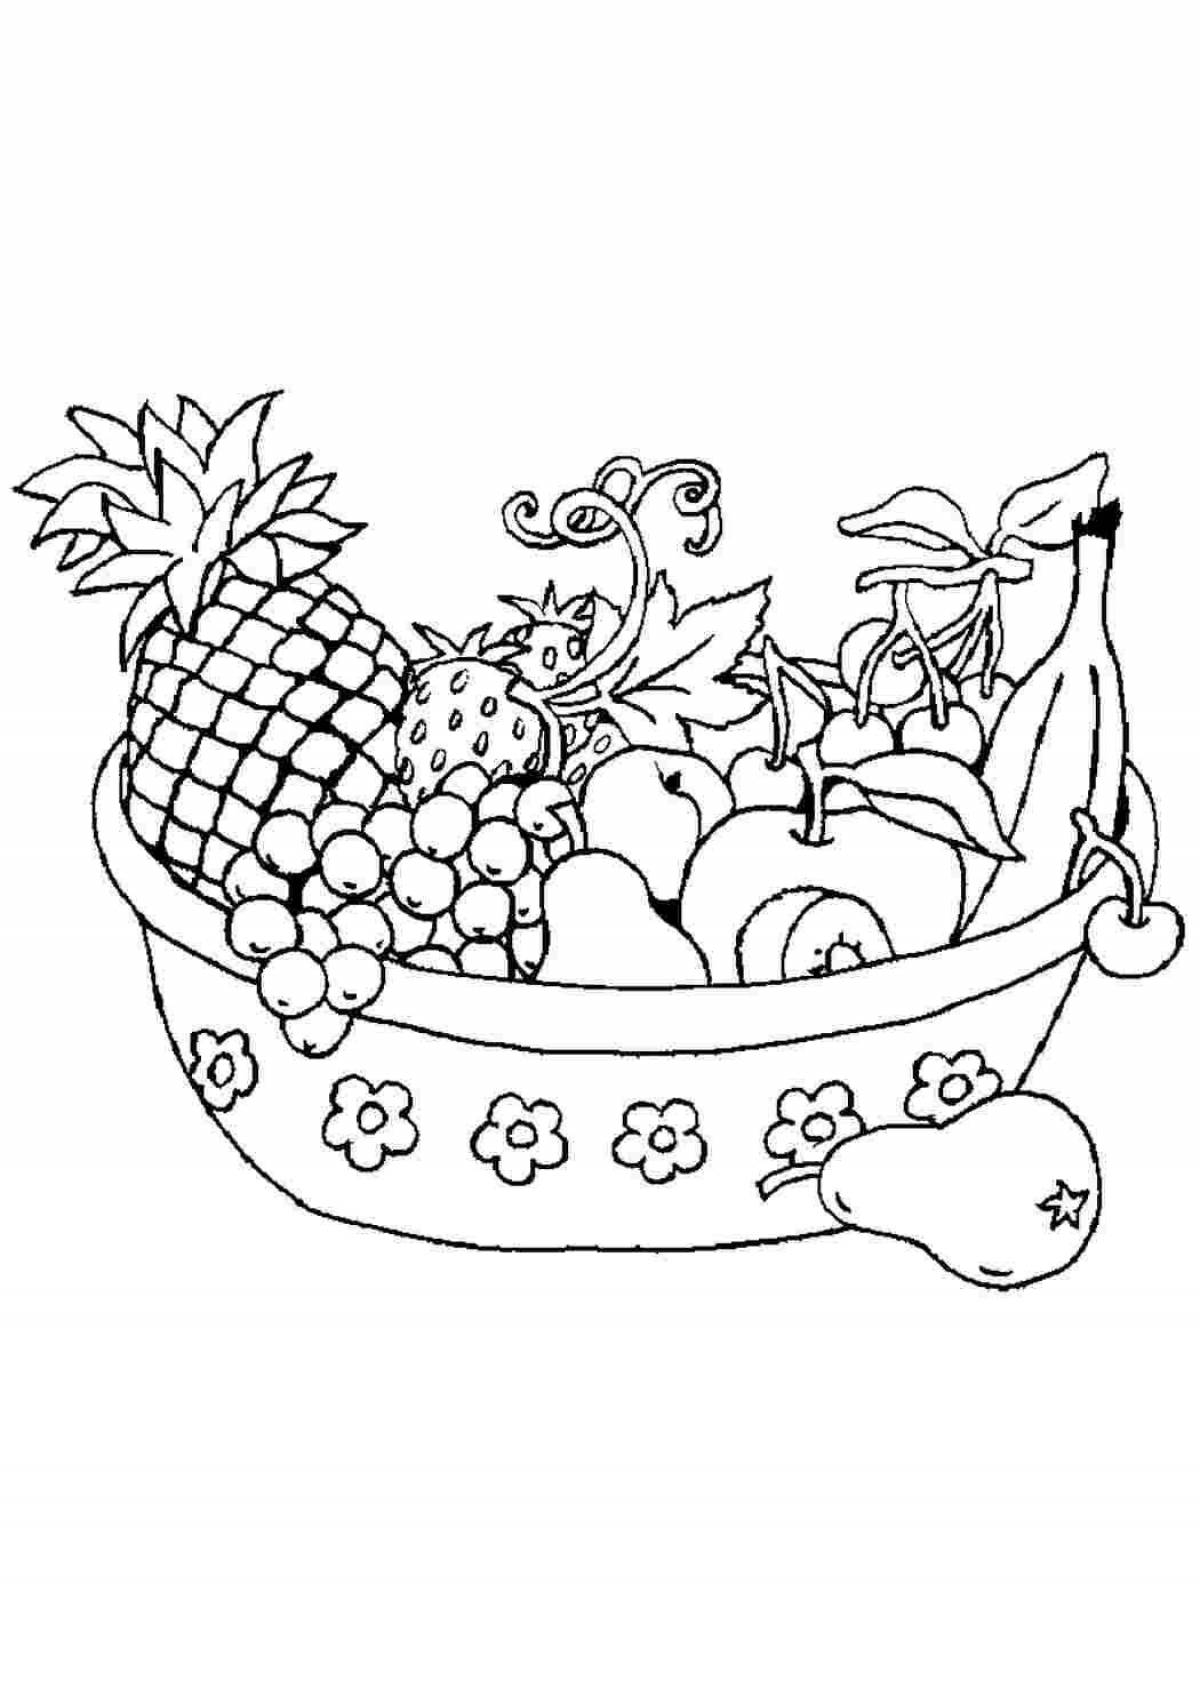 Coloring book appetizing fruit salad for kids